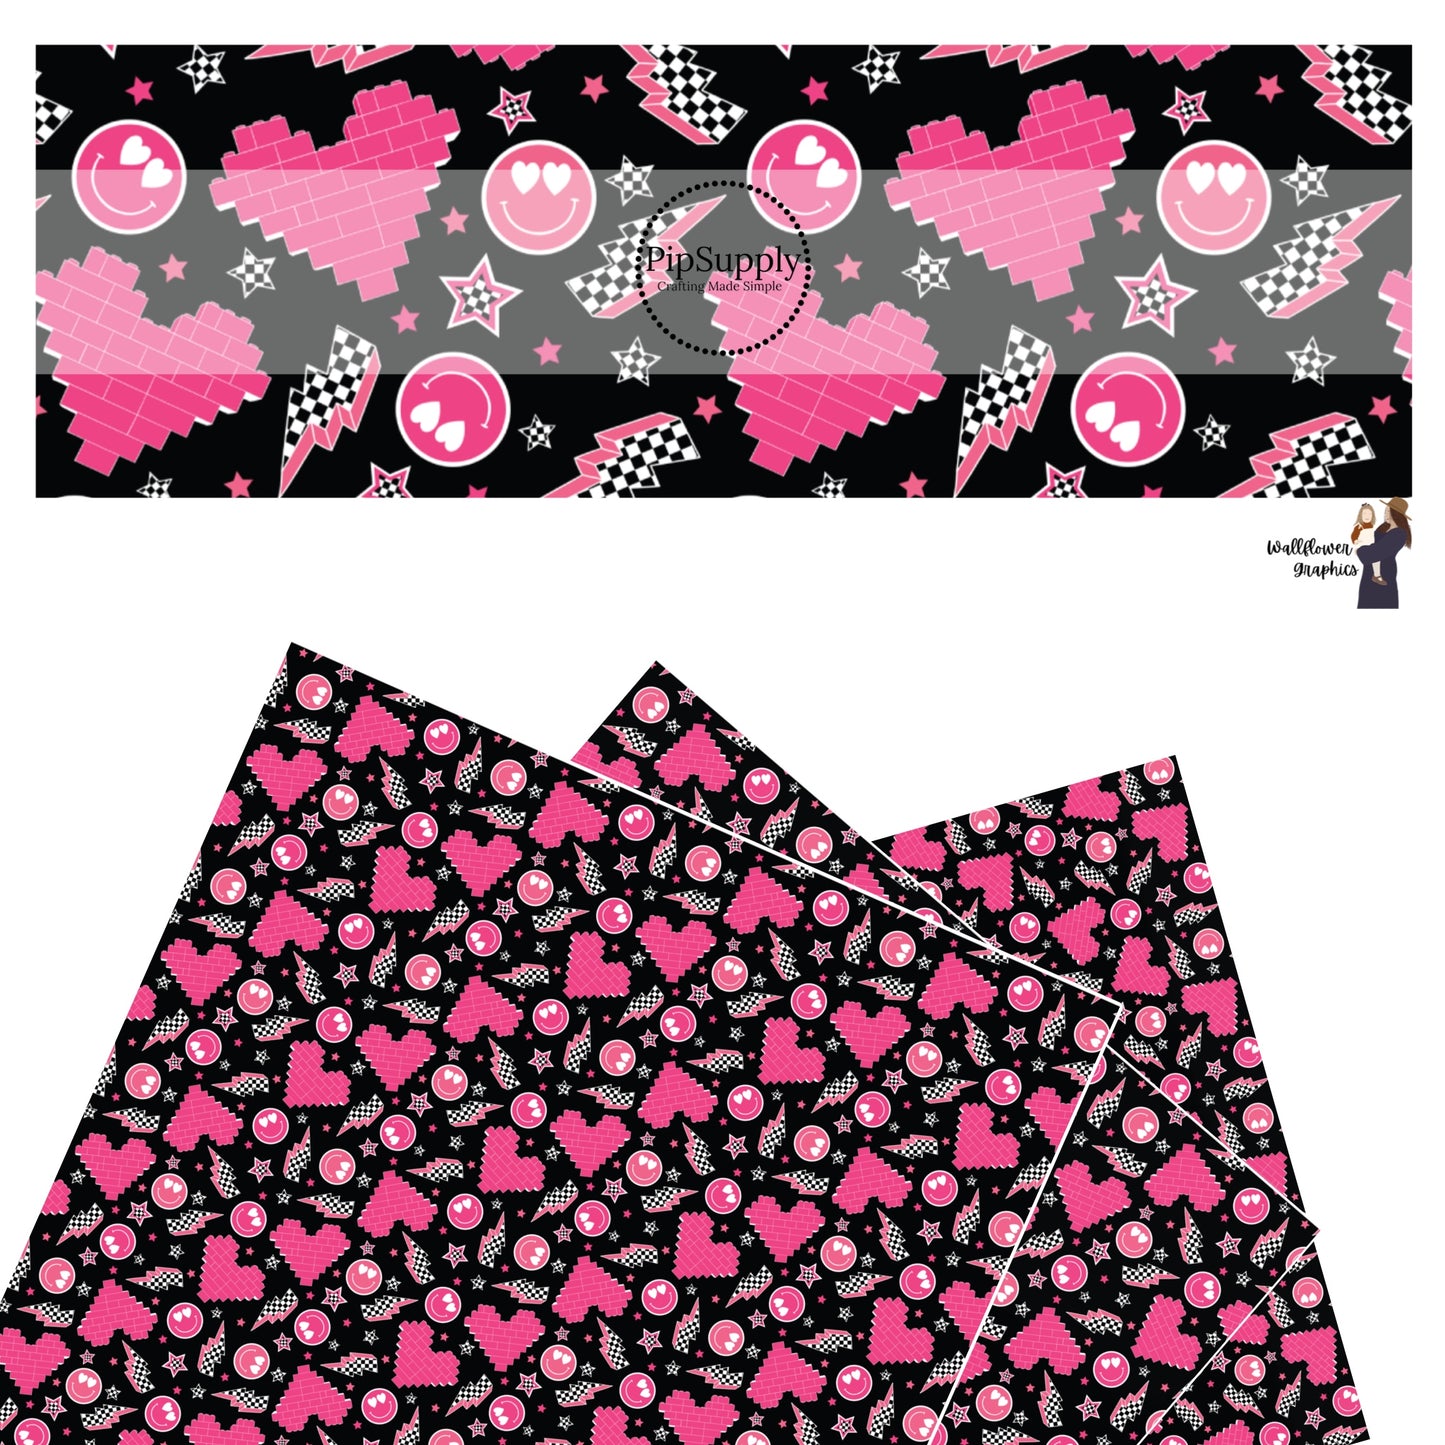 Pink hearts, smiley faces, lightning bolts, and stars on black faux leather sheets